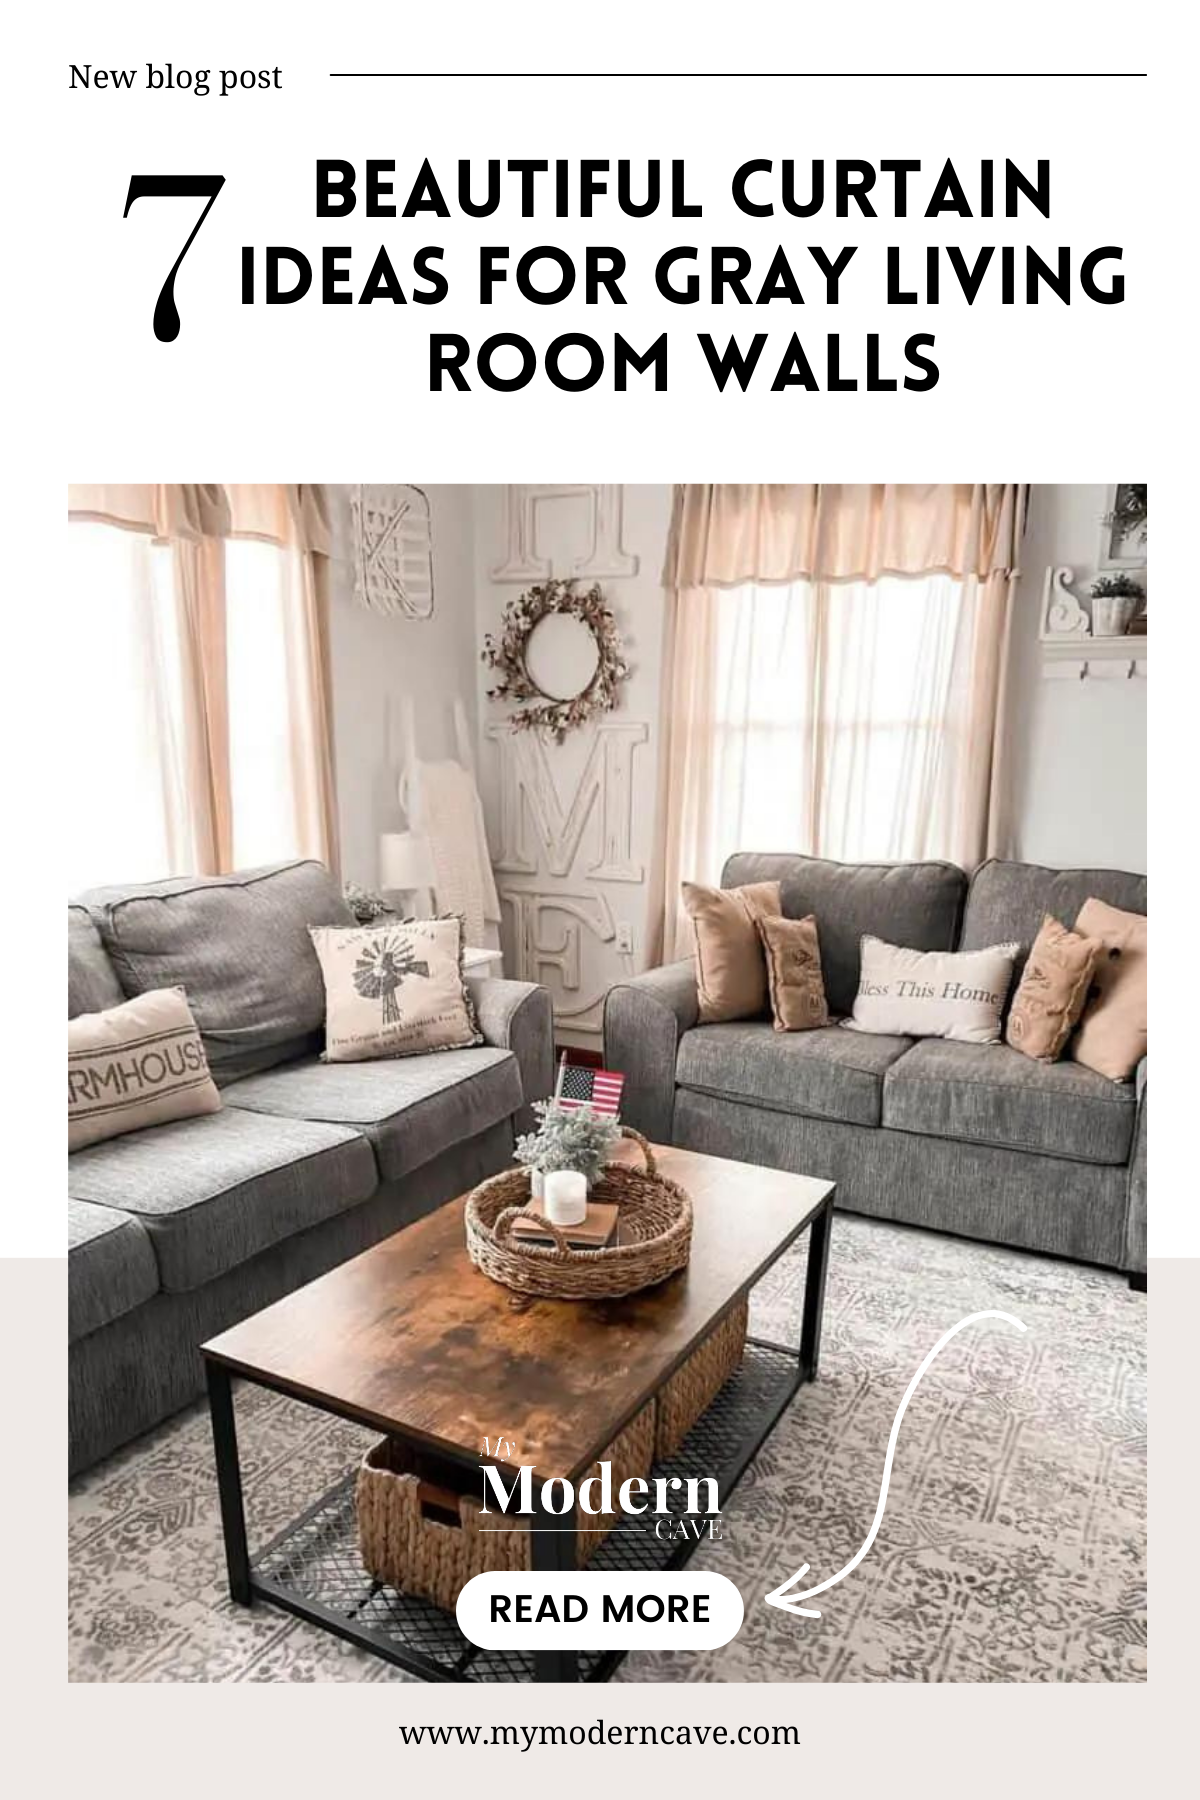 Curtain Ideas  For Gray Living Room walls Infographic